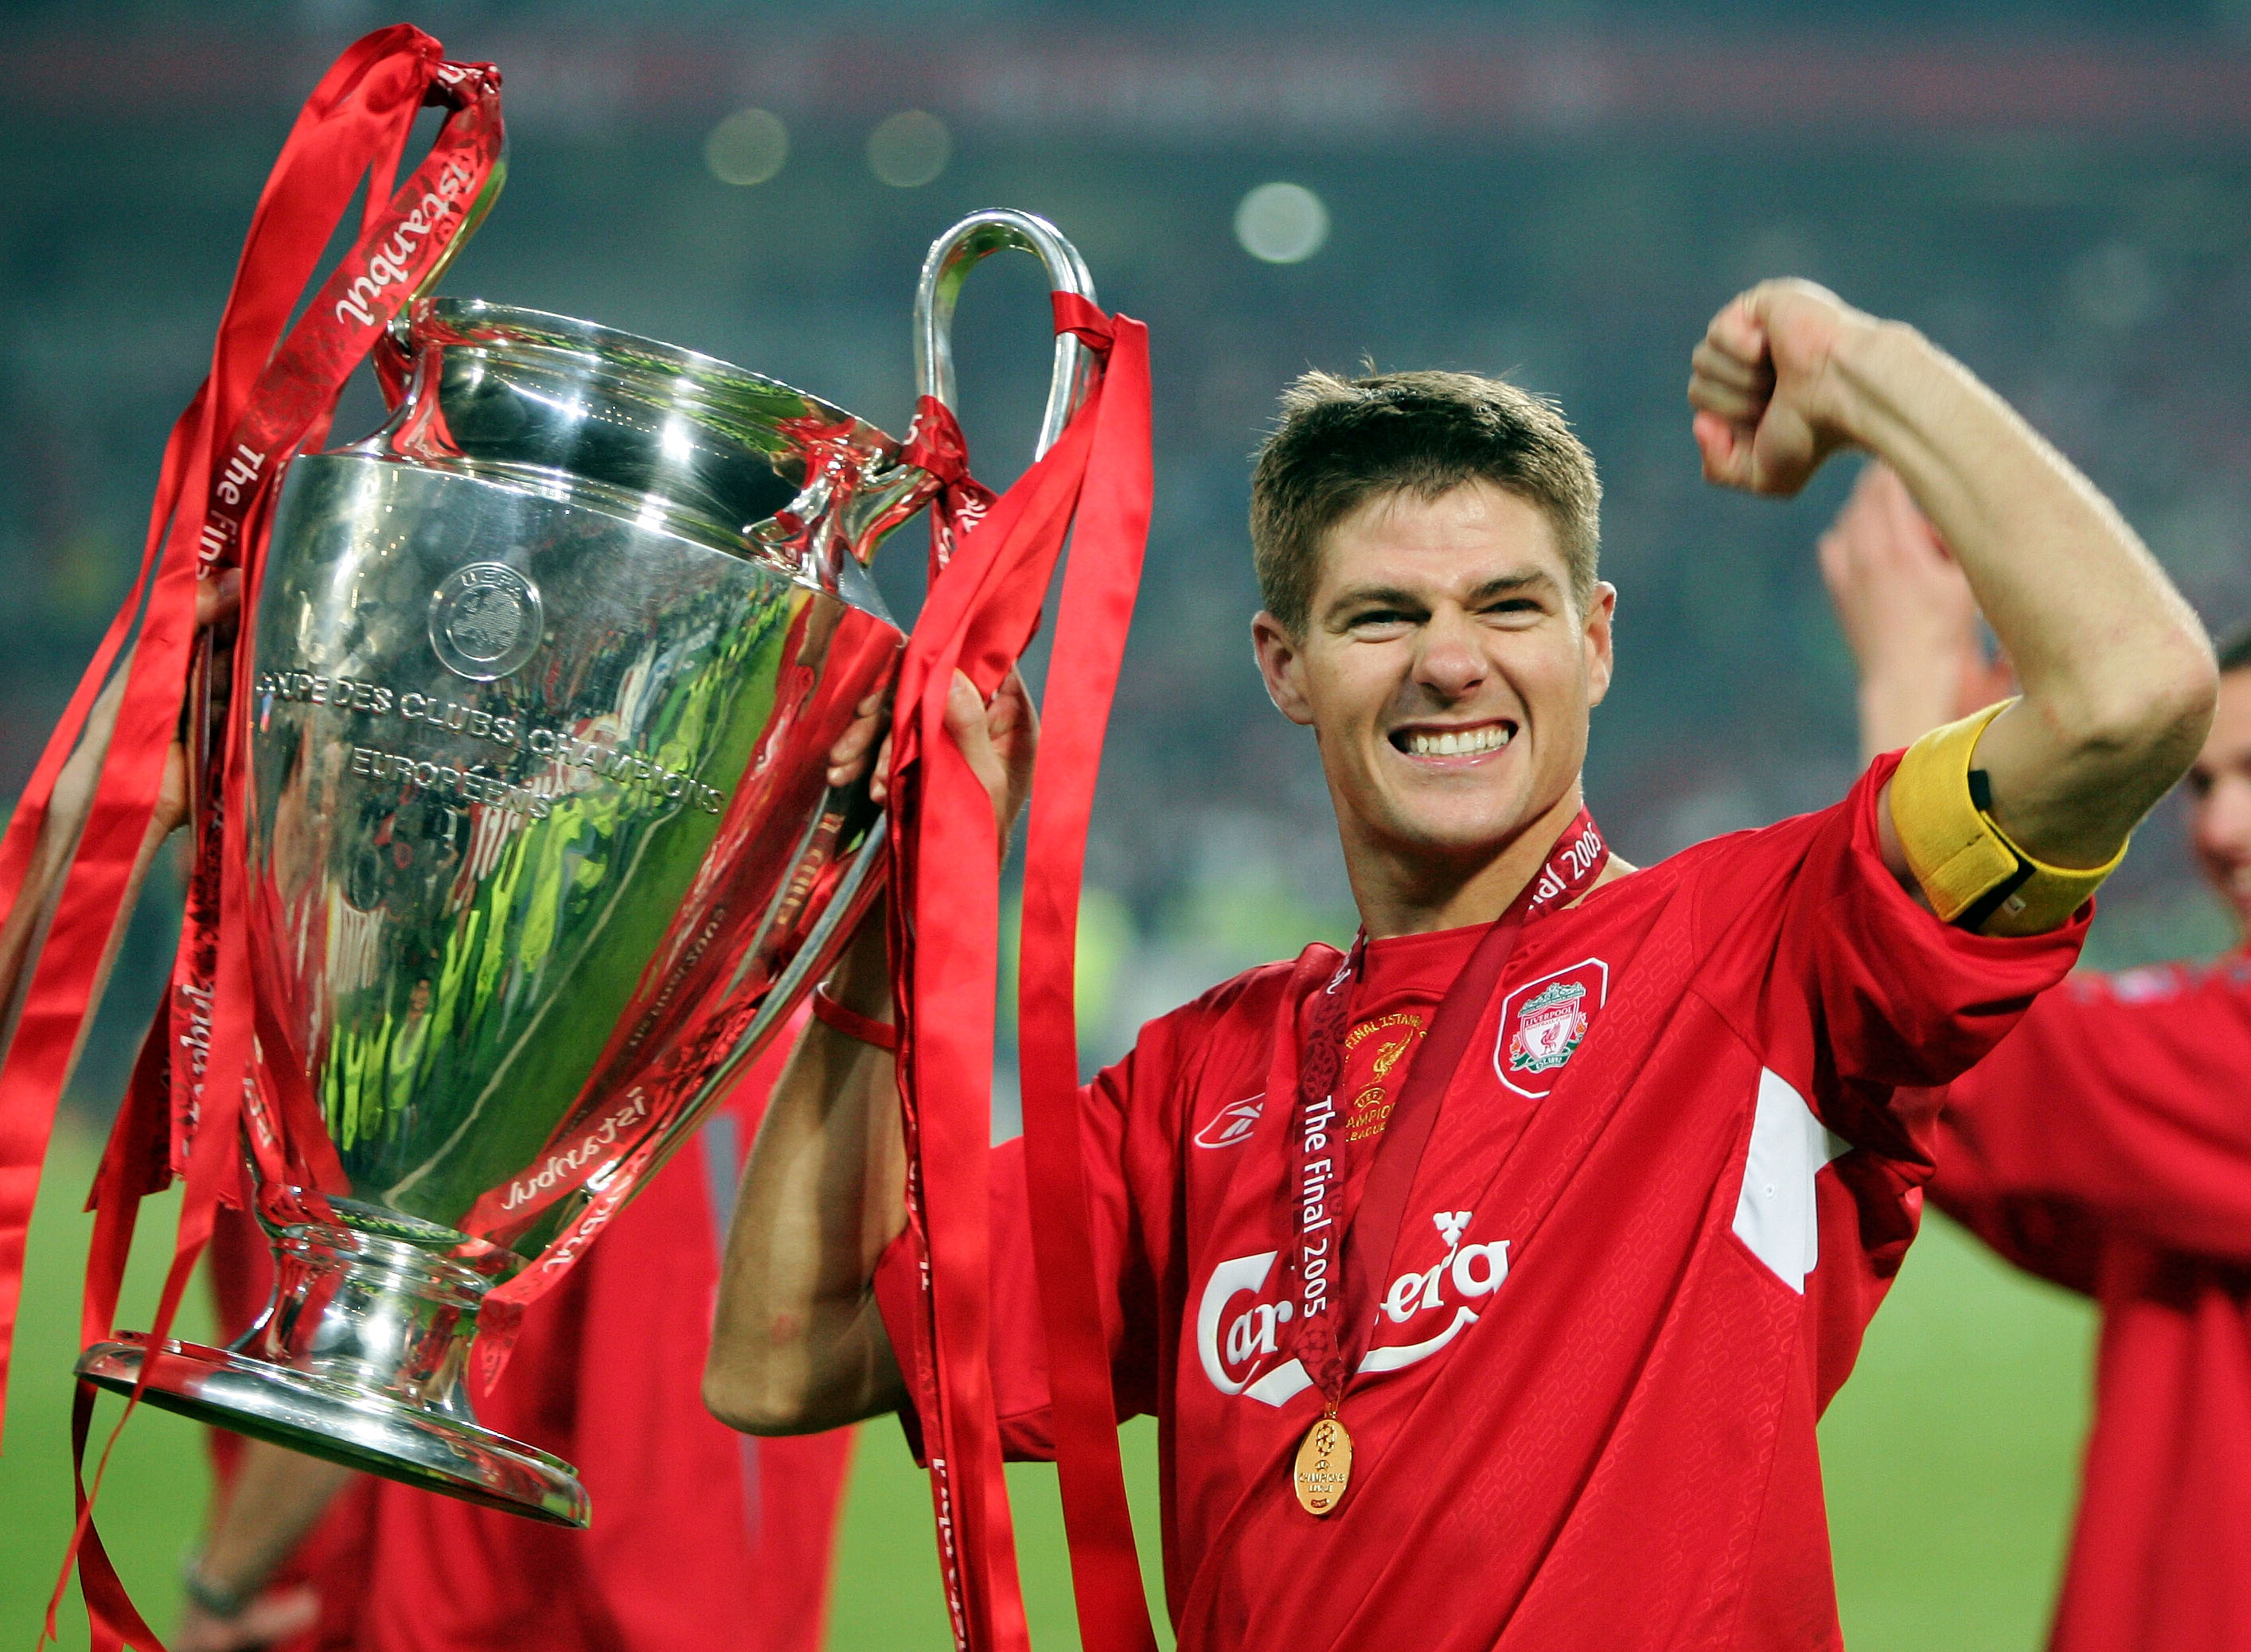 ISTANBUL, TURKEY - MAY 25:  Liverpool captain Steven Gerrard lifts the European Cup after Liverpool won the European Champions League final between Liverpool and AC Milan on May 25, 2005 at the Ataturk Olympic Stadium in Istanbul, Turkey.  (Photo by Mike